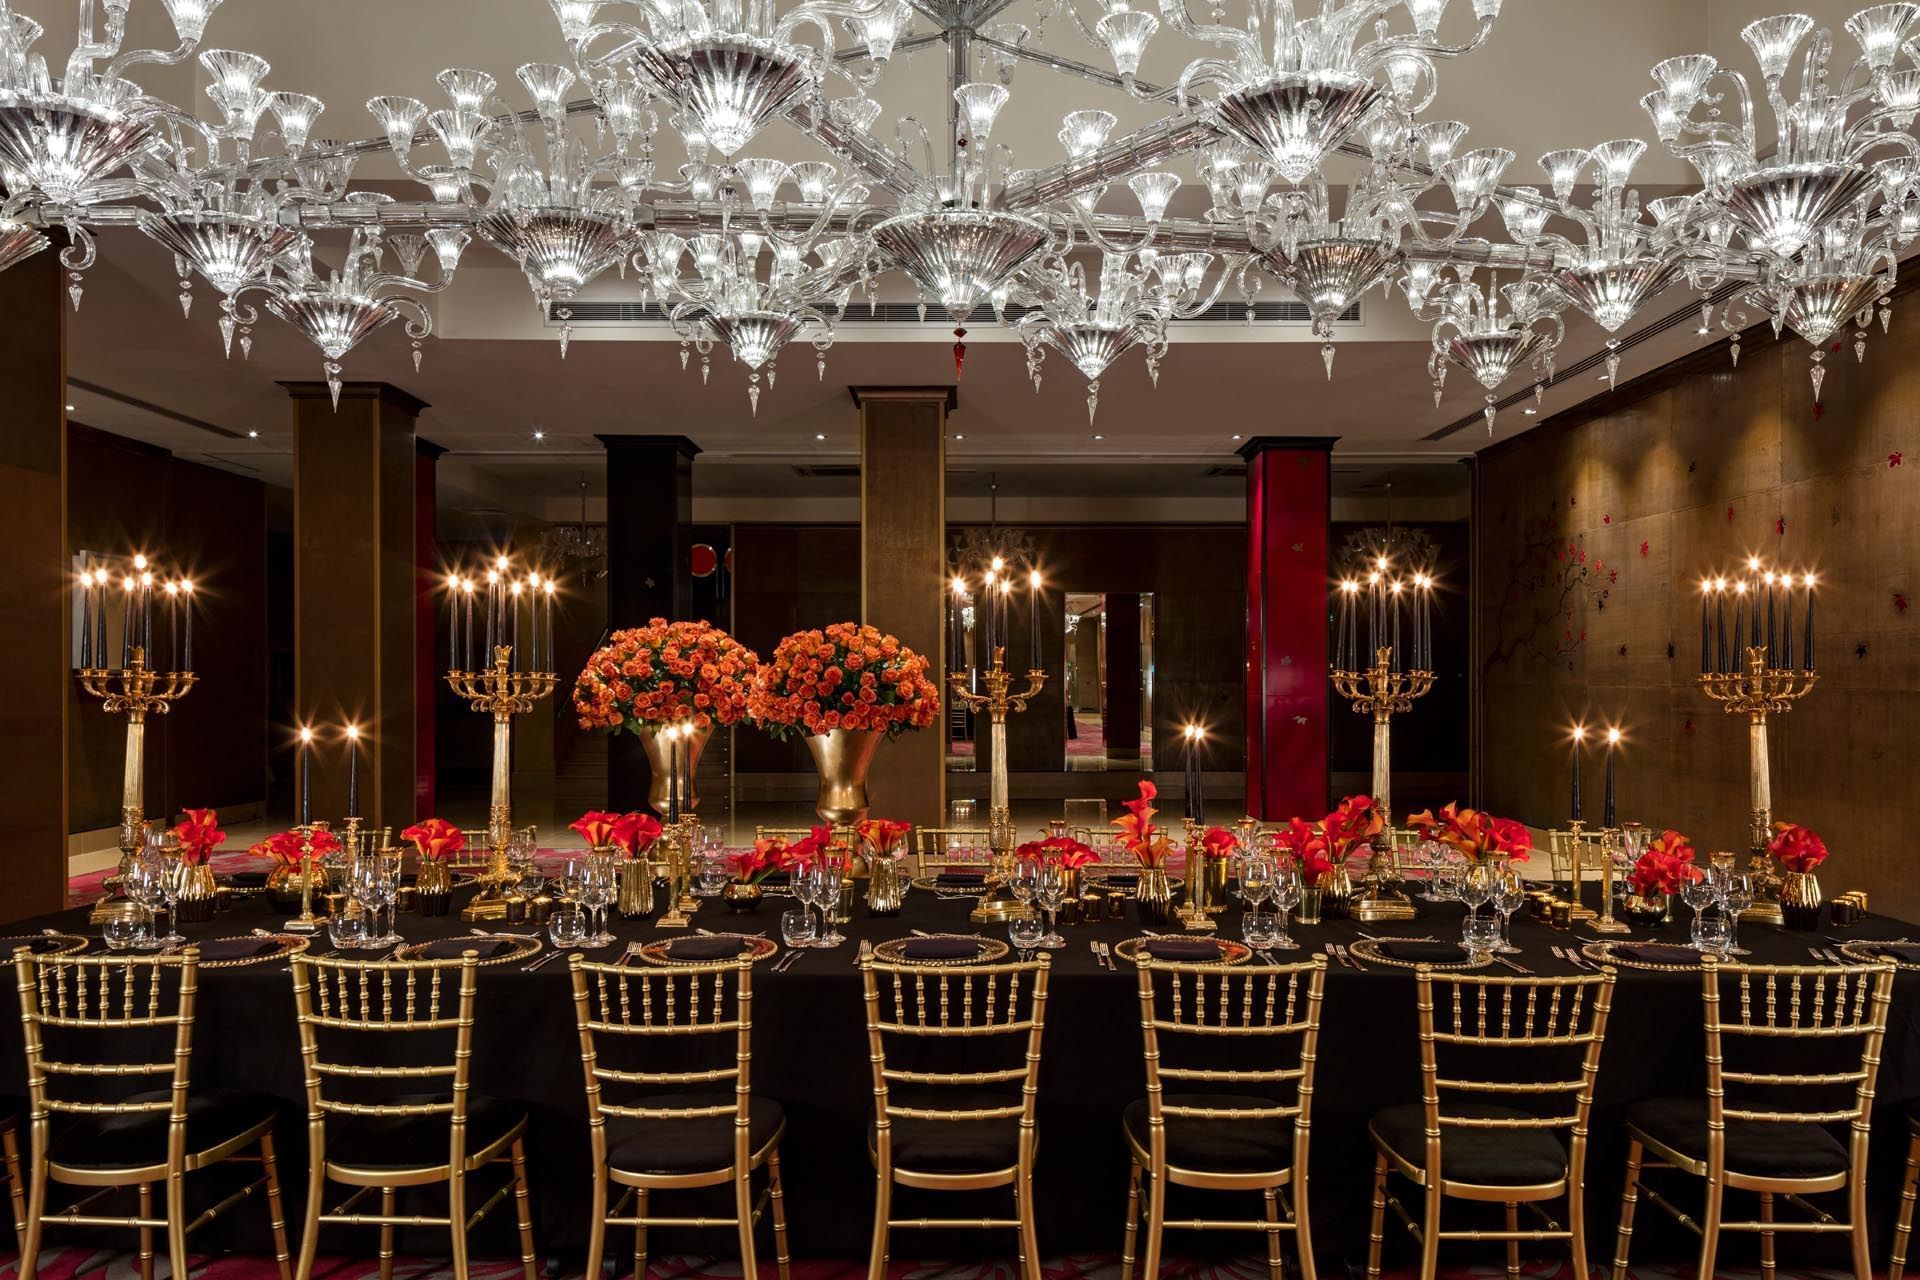 Table setup in Crystal dining room at The May Fair Hotel London